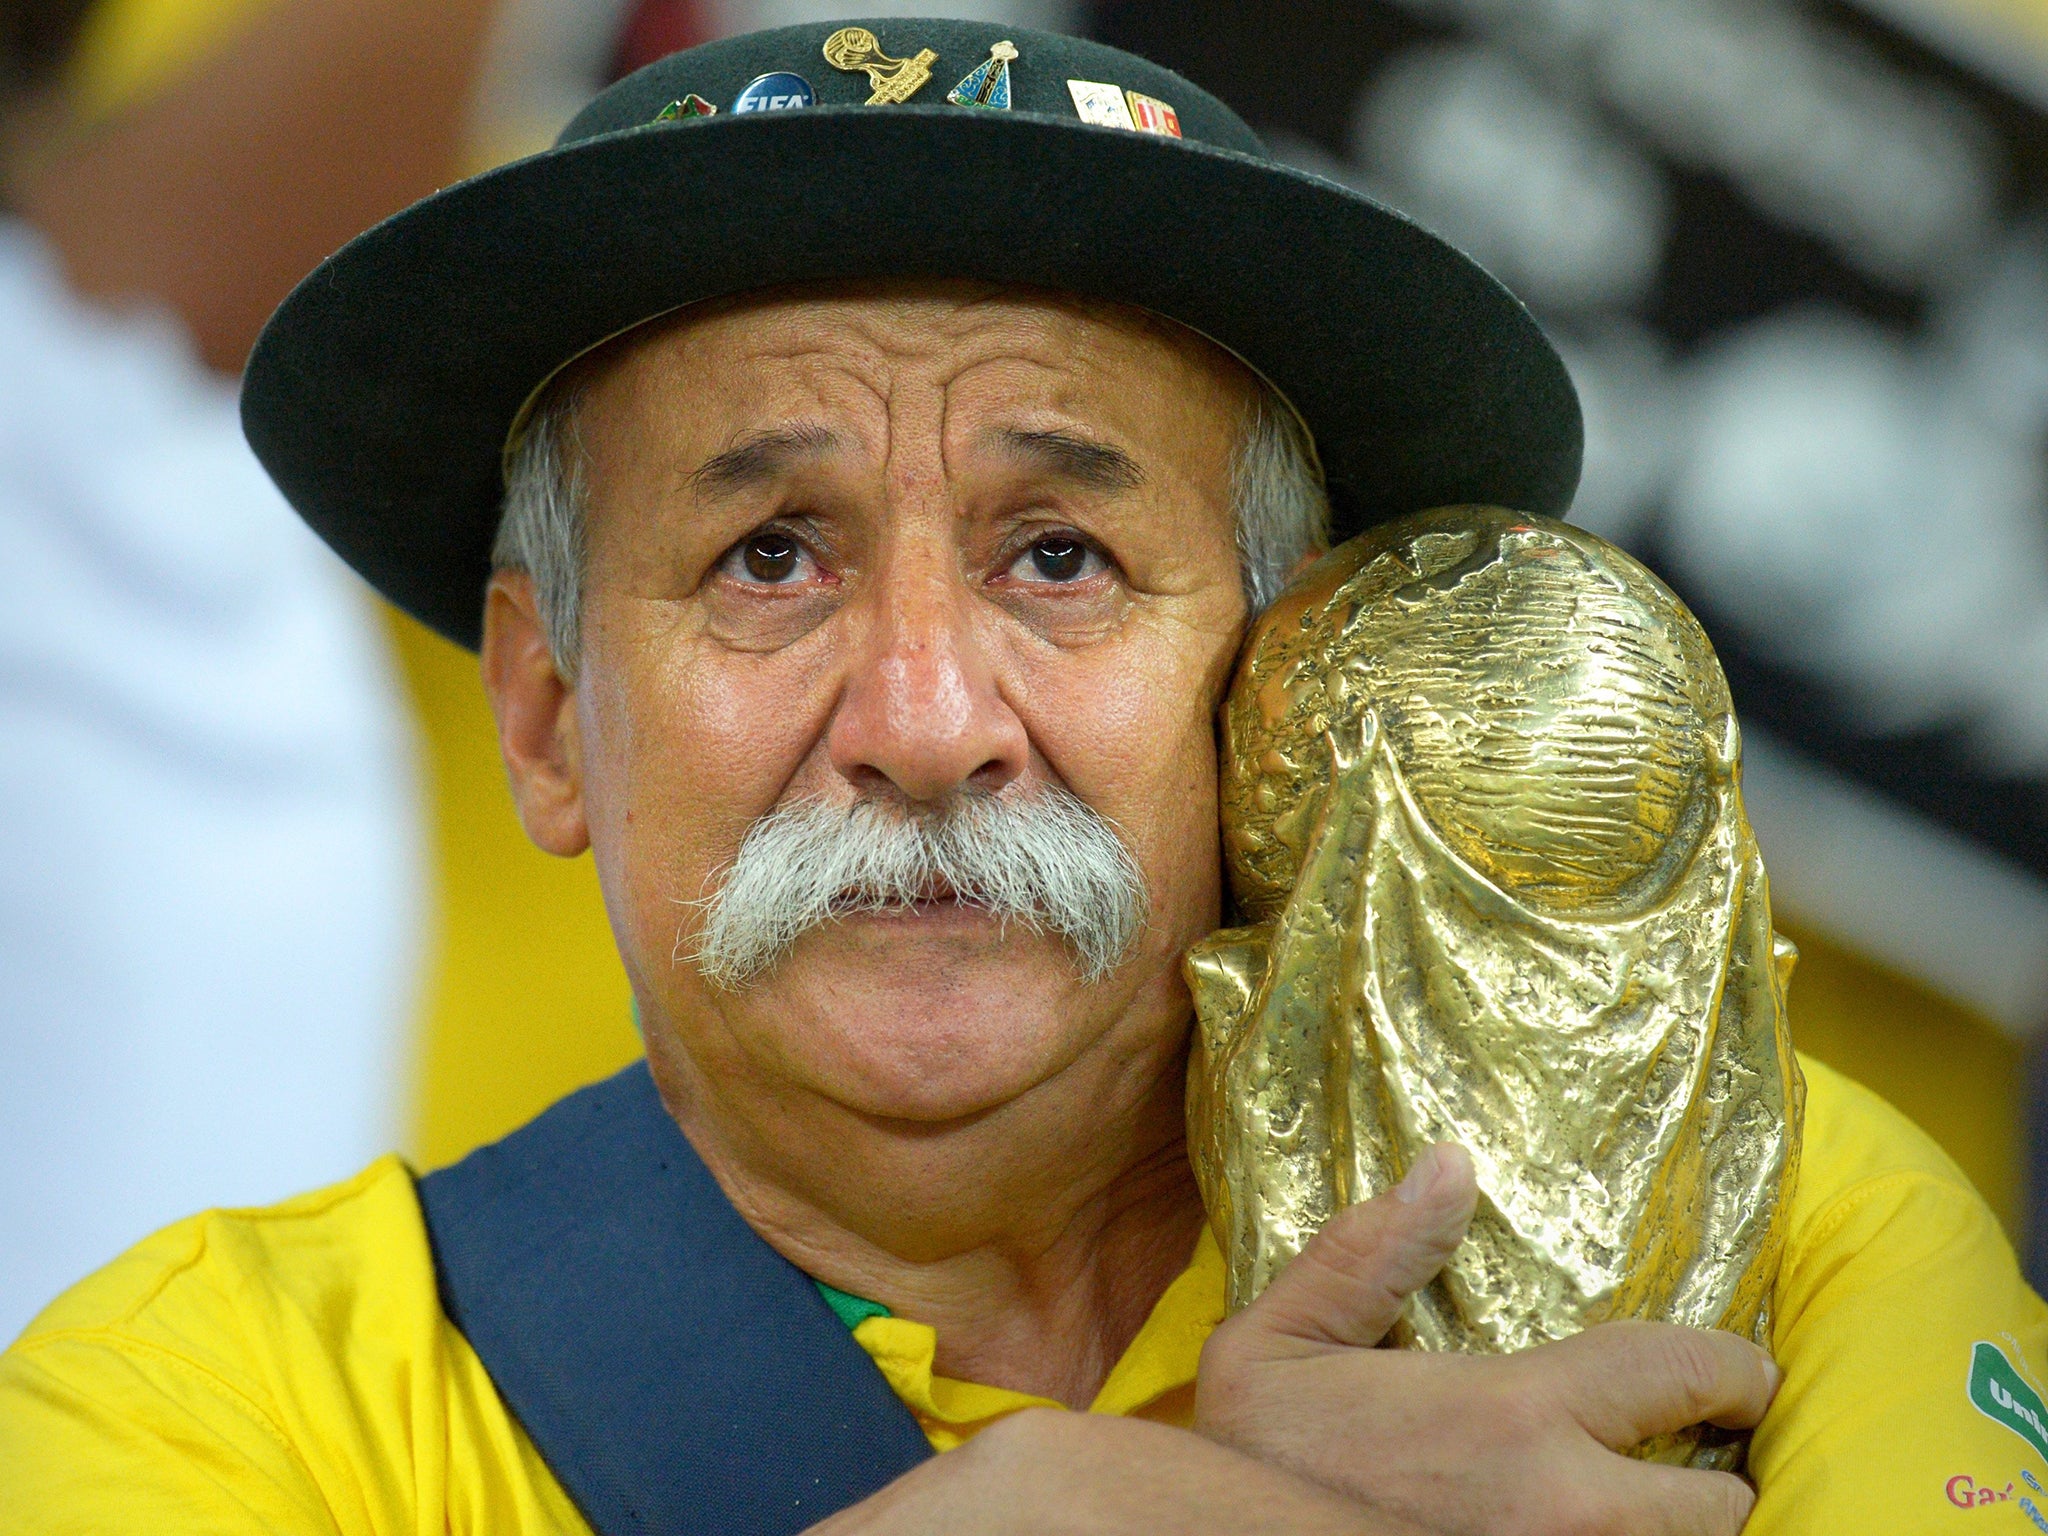 A Brazilian fan shows his dejection after the FIFA World Cup 2014 semi final match between Brazil and Germany at the Estadio Mineirao in Belo Horizonte, Brazil